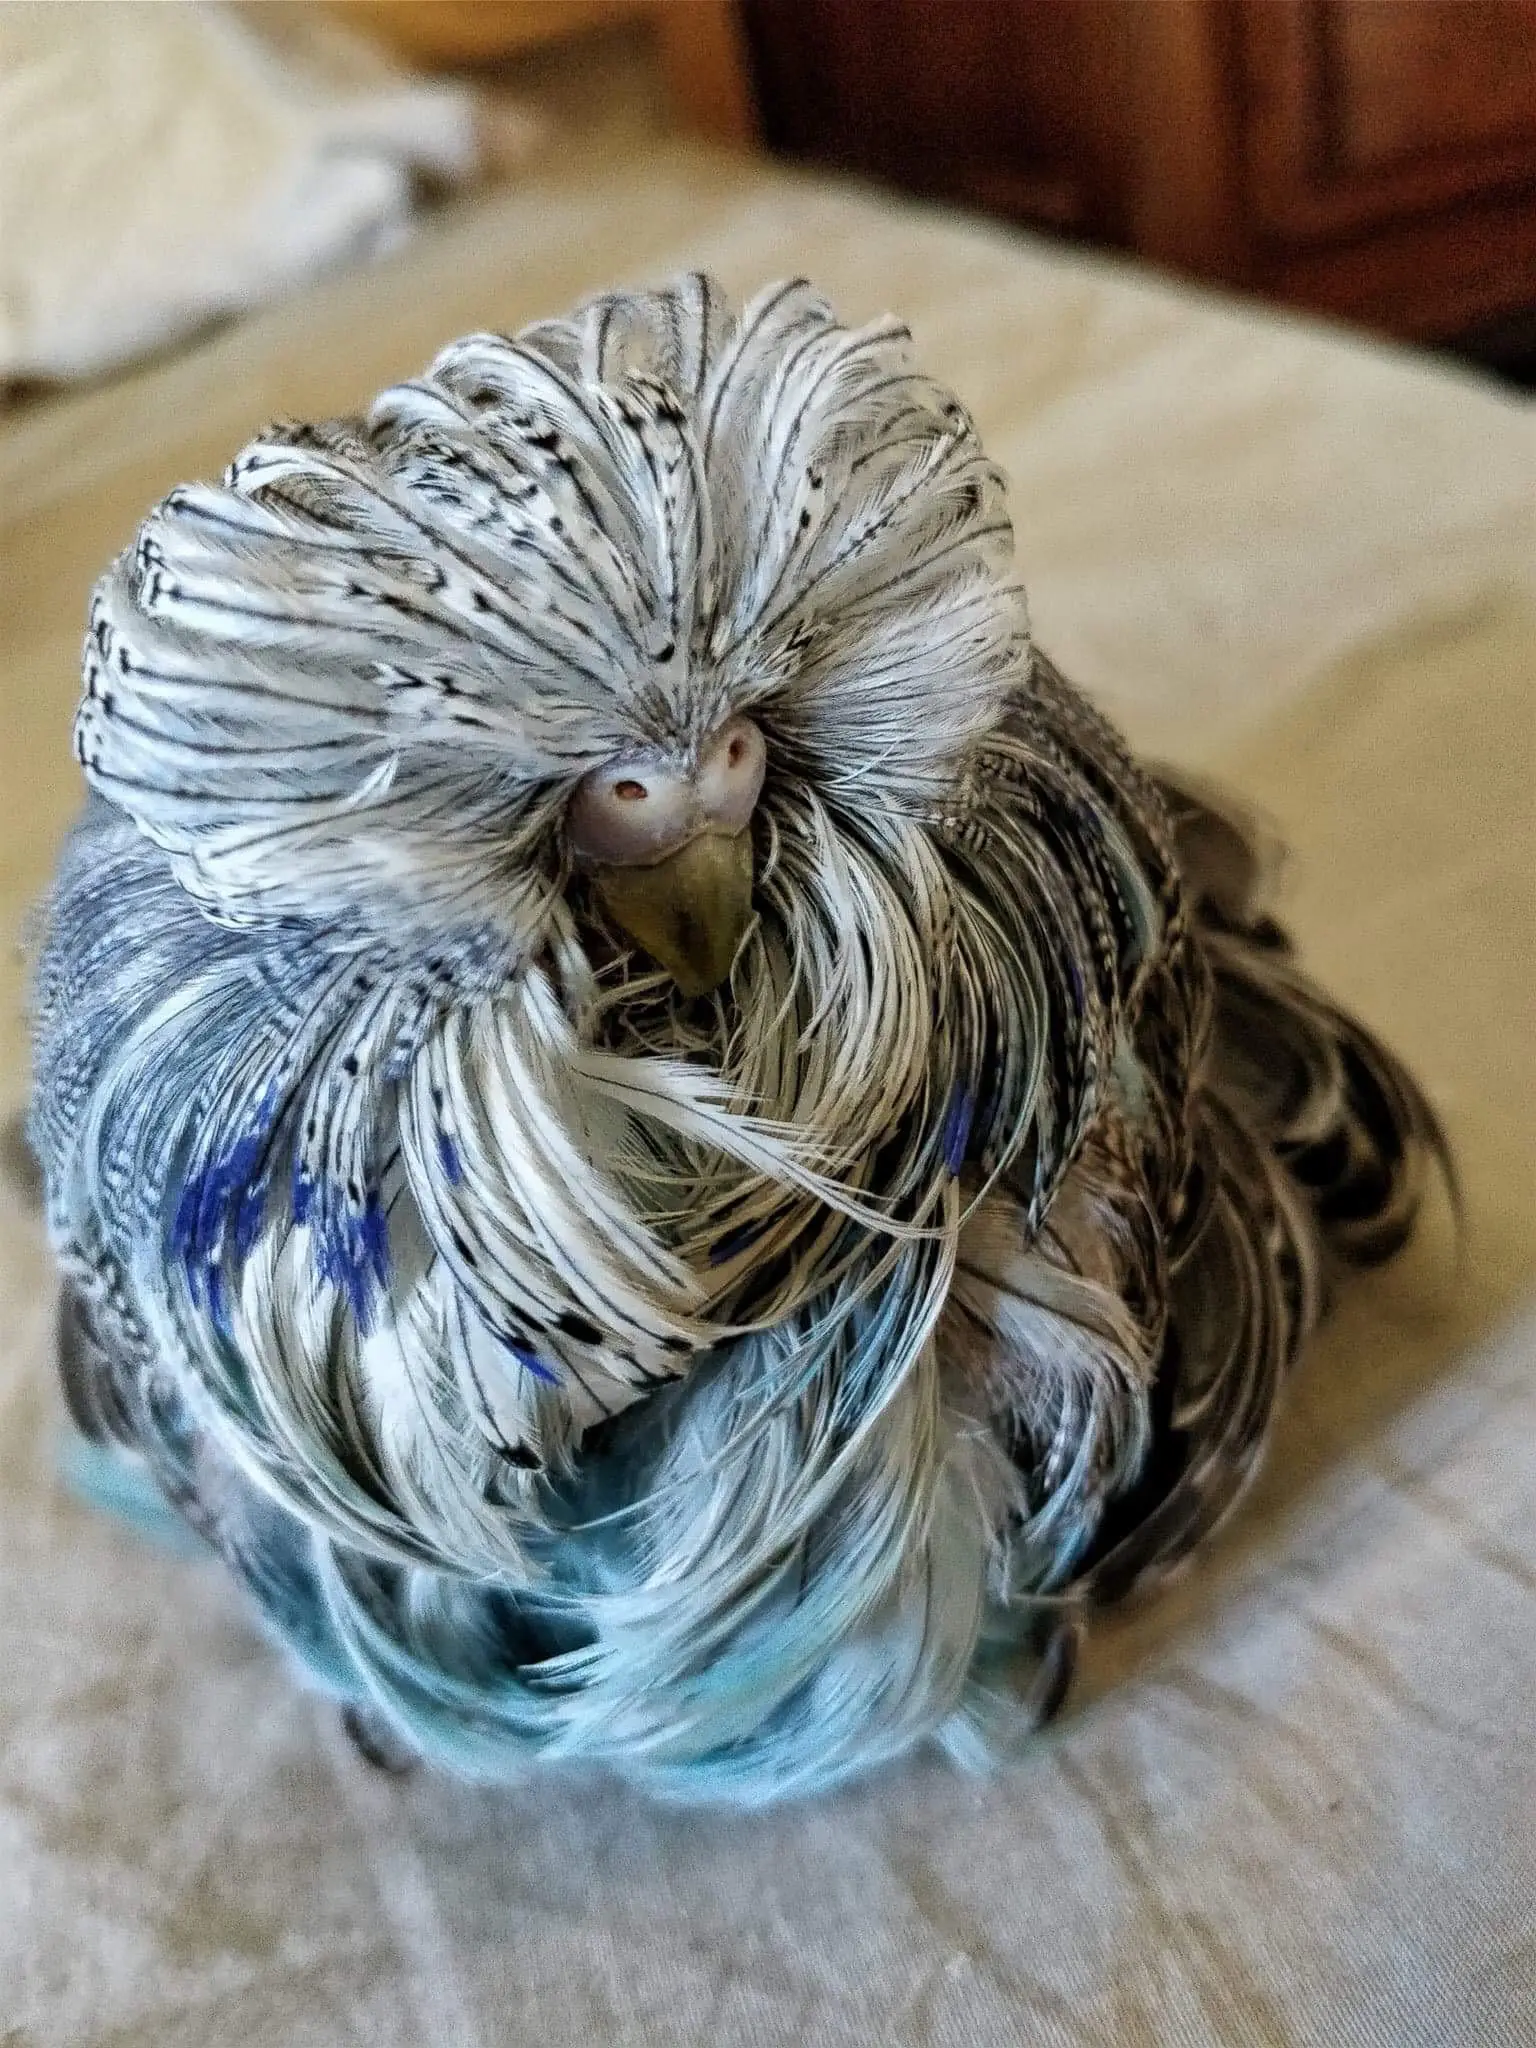 Feather duster budgie photo